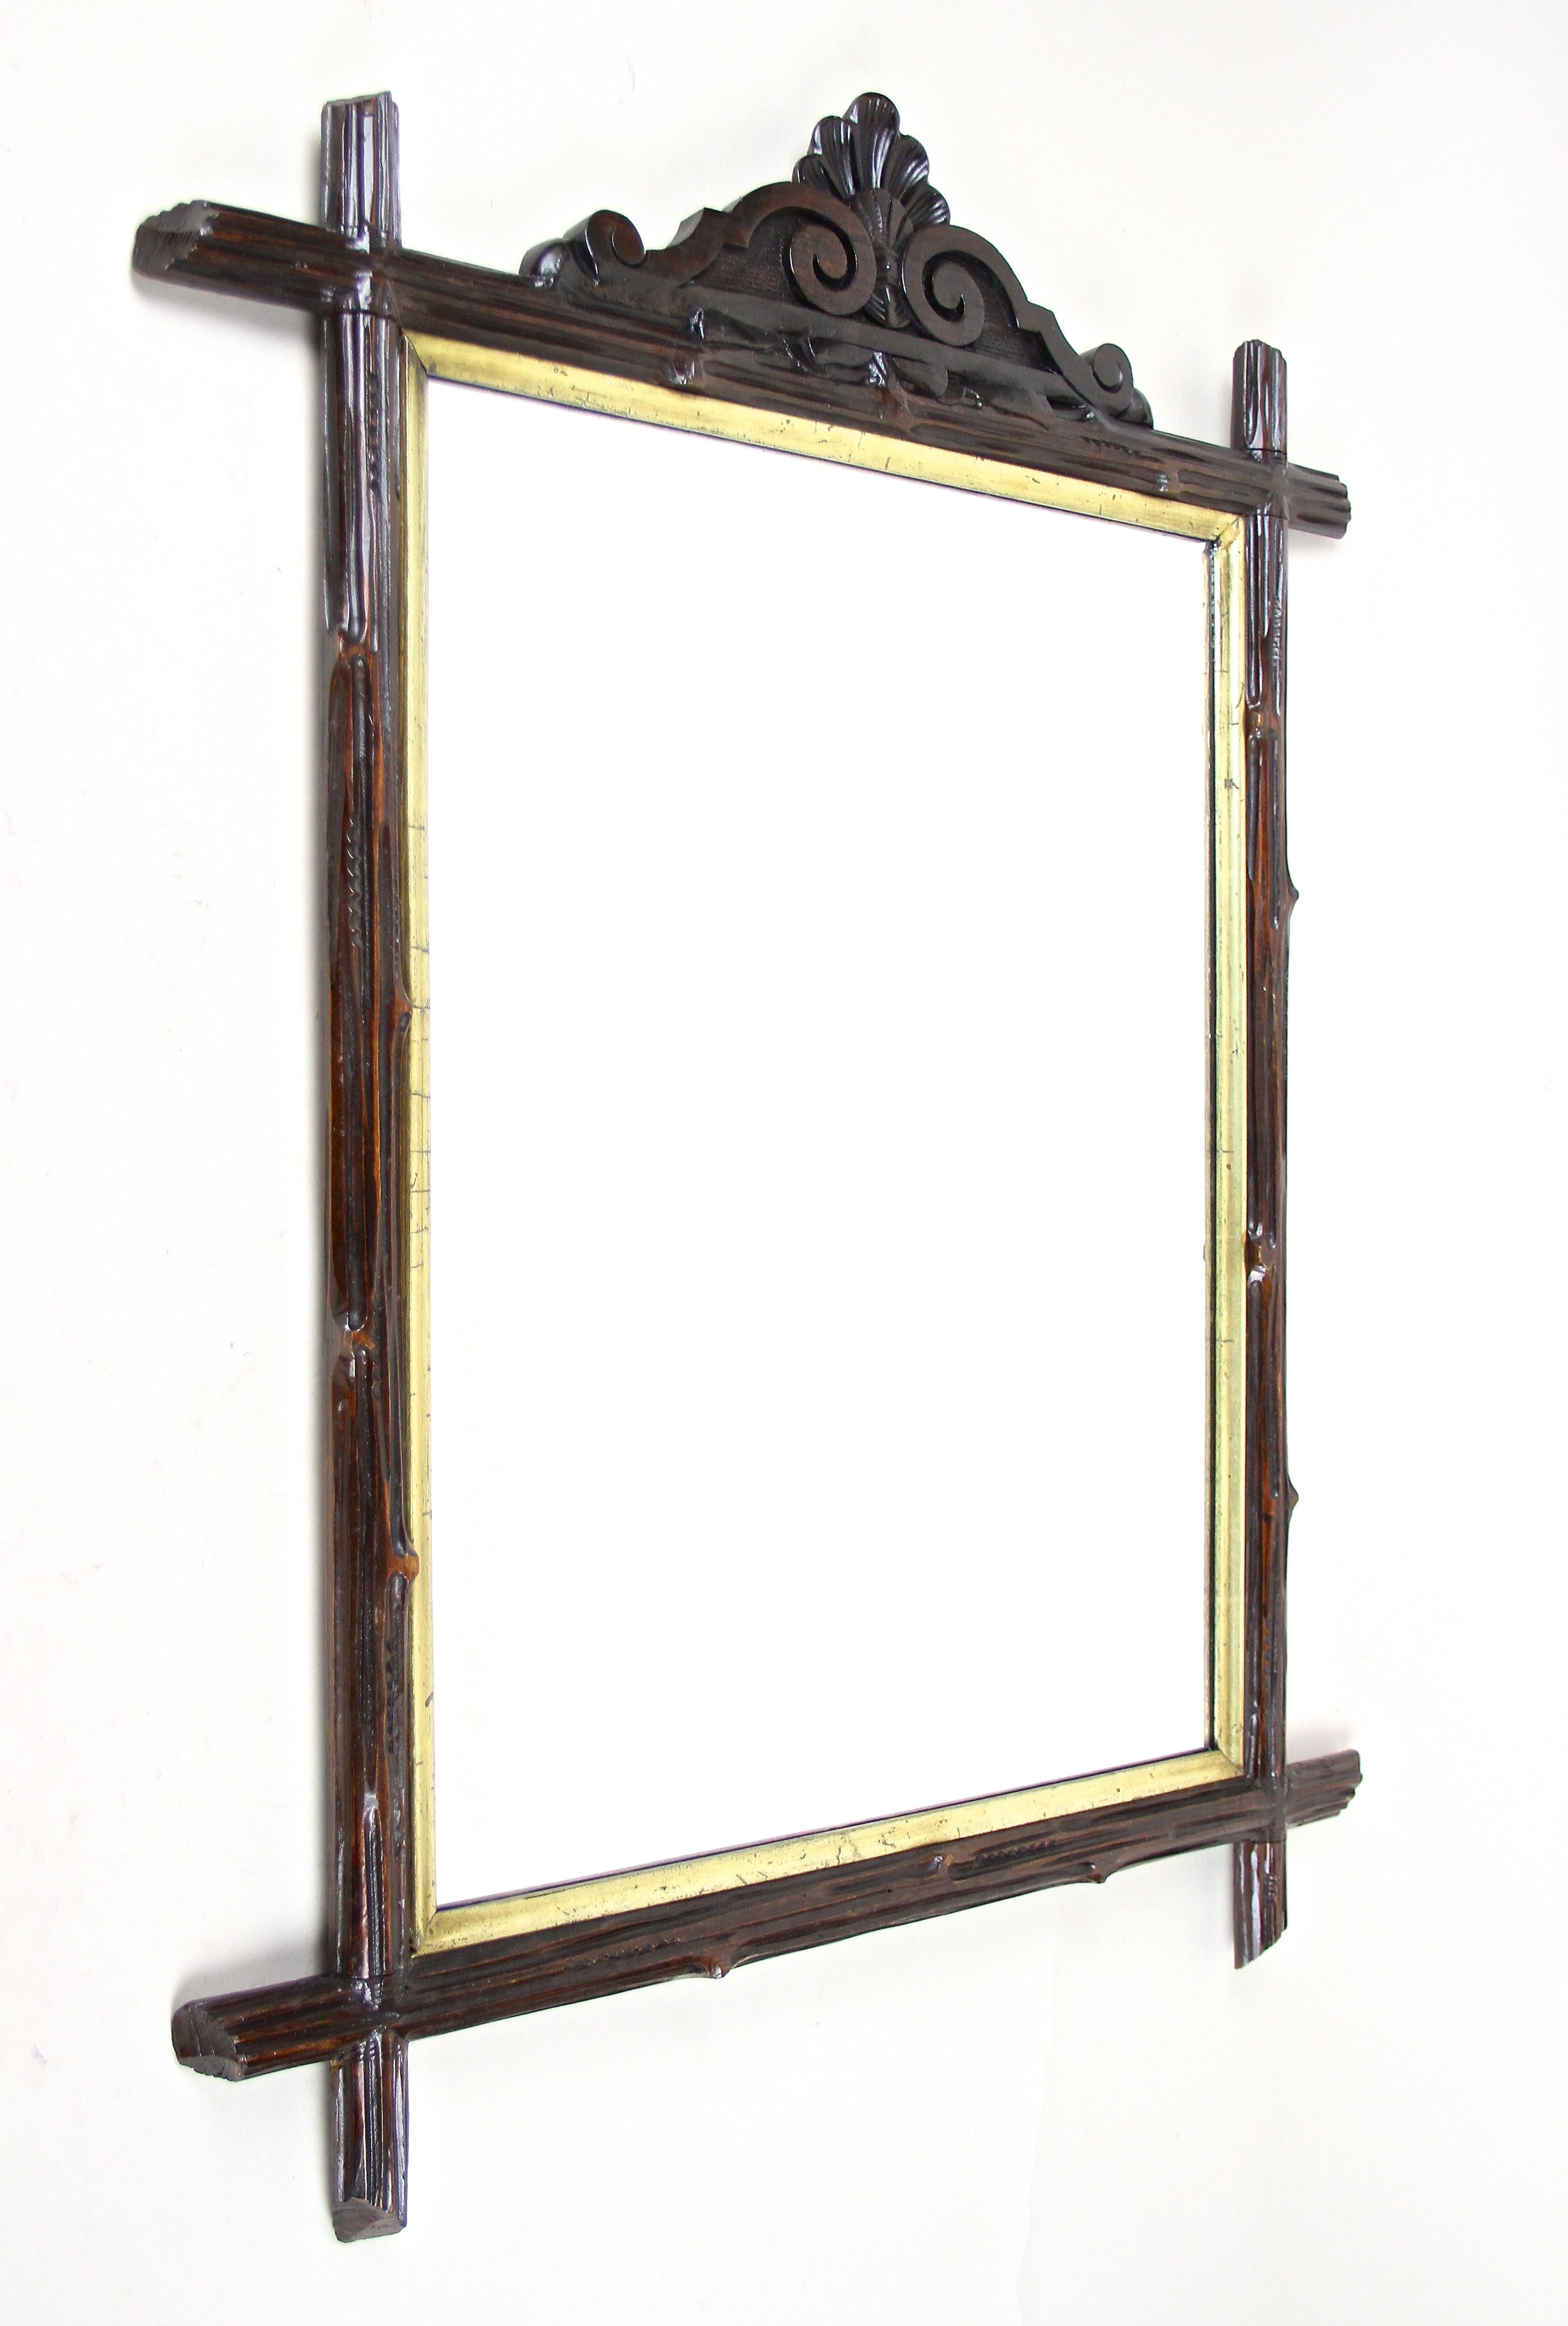 Amazing rustic Black Forest wall mirror from the late 19th century in Austria. Elaborately handcrafted around 1880 this rural mirror shows an absolute unique design. The hand carved basswood frame was created in the manner of tree branches.